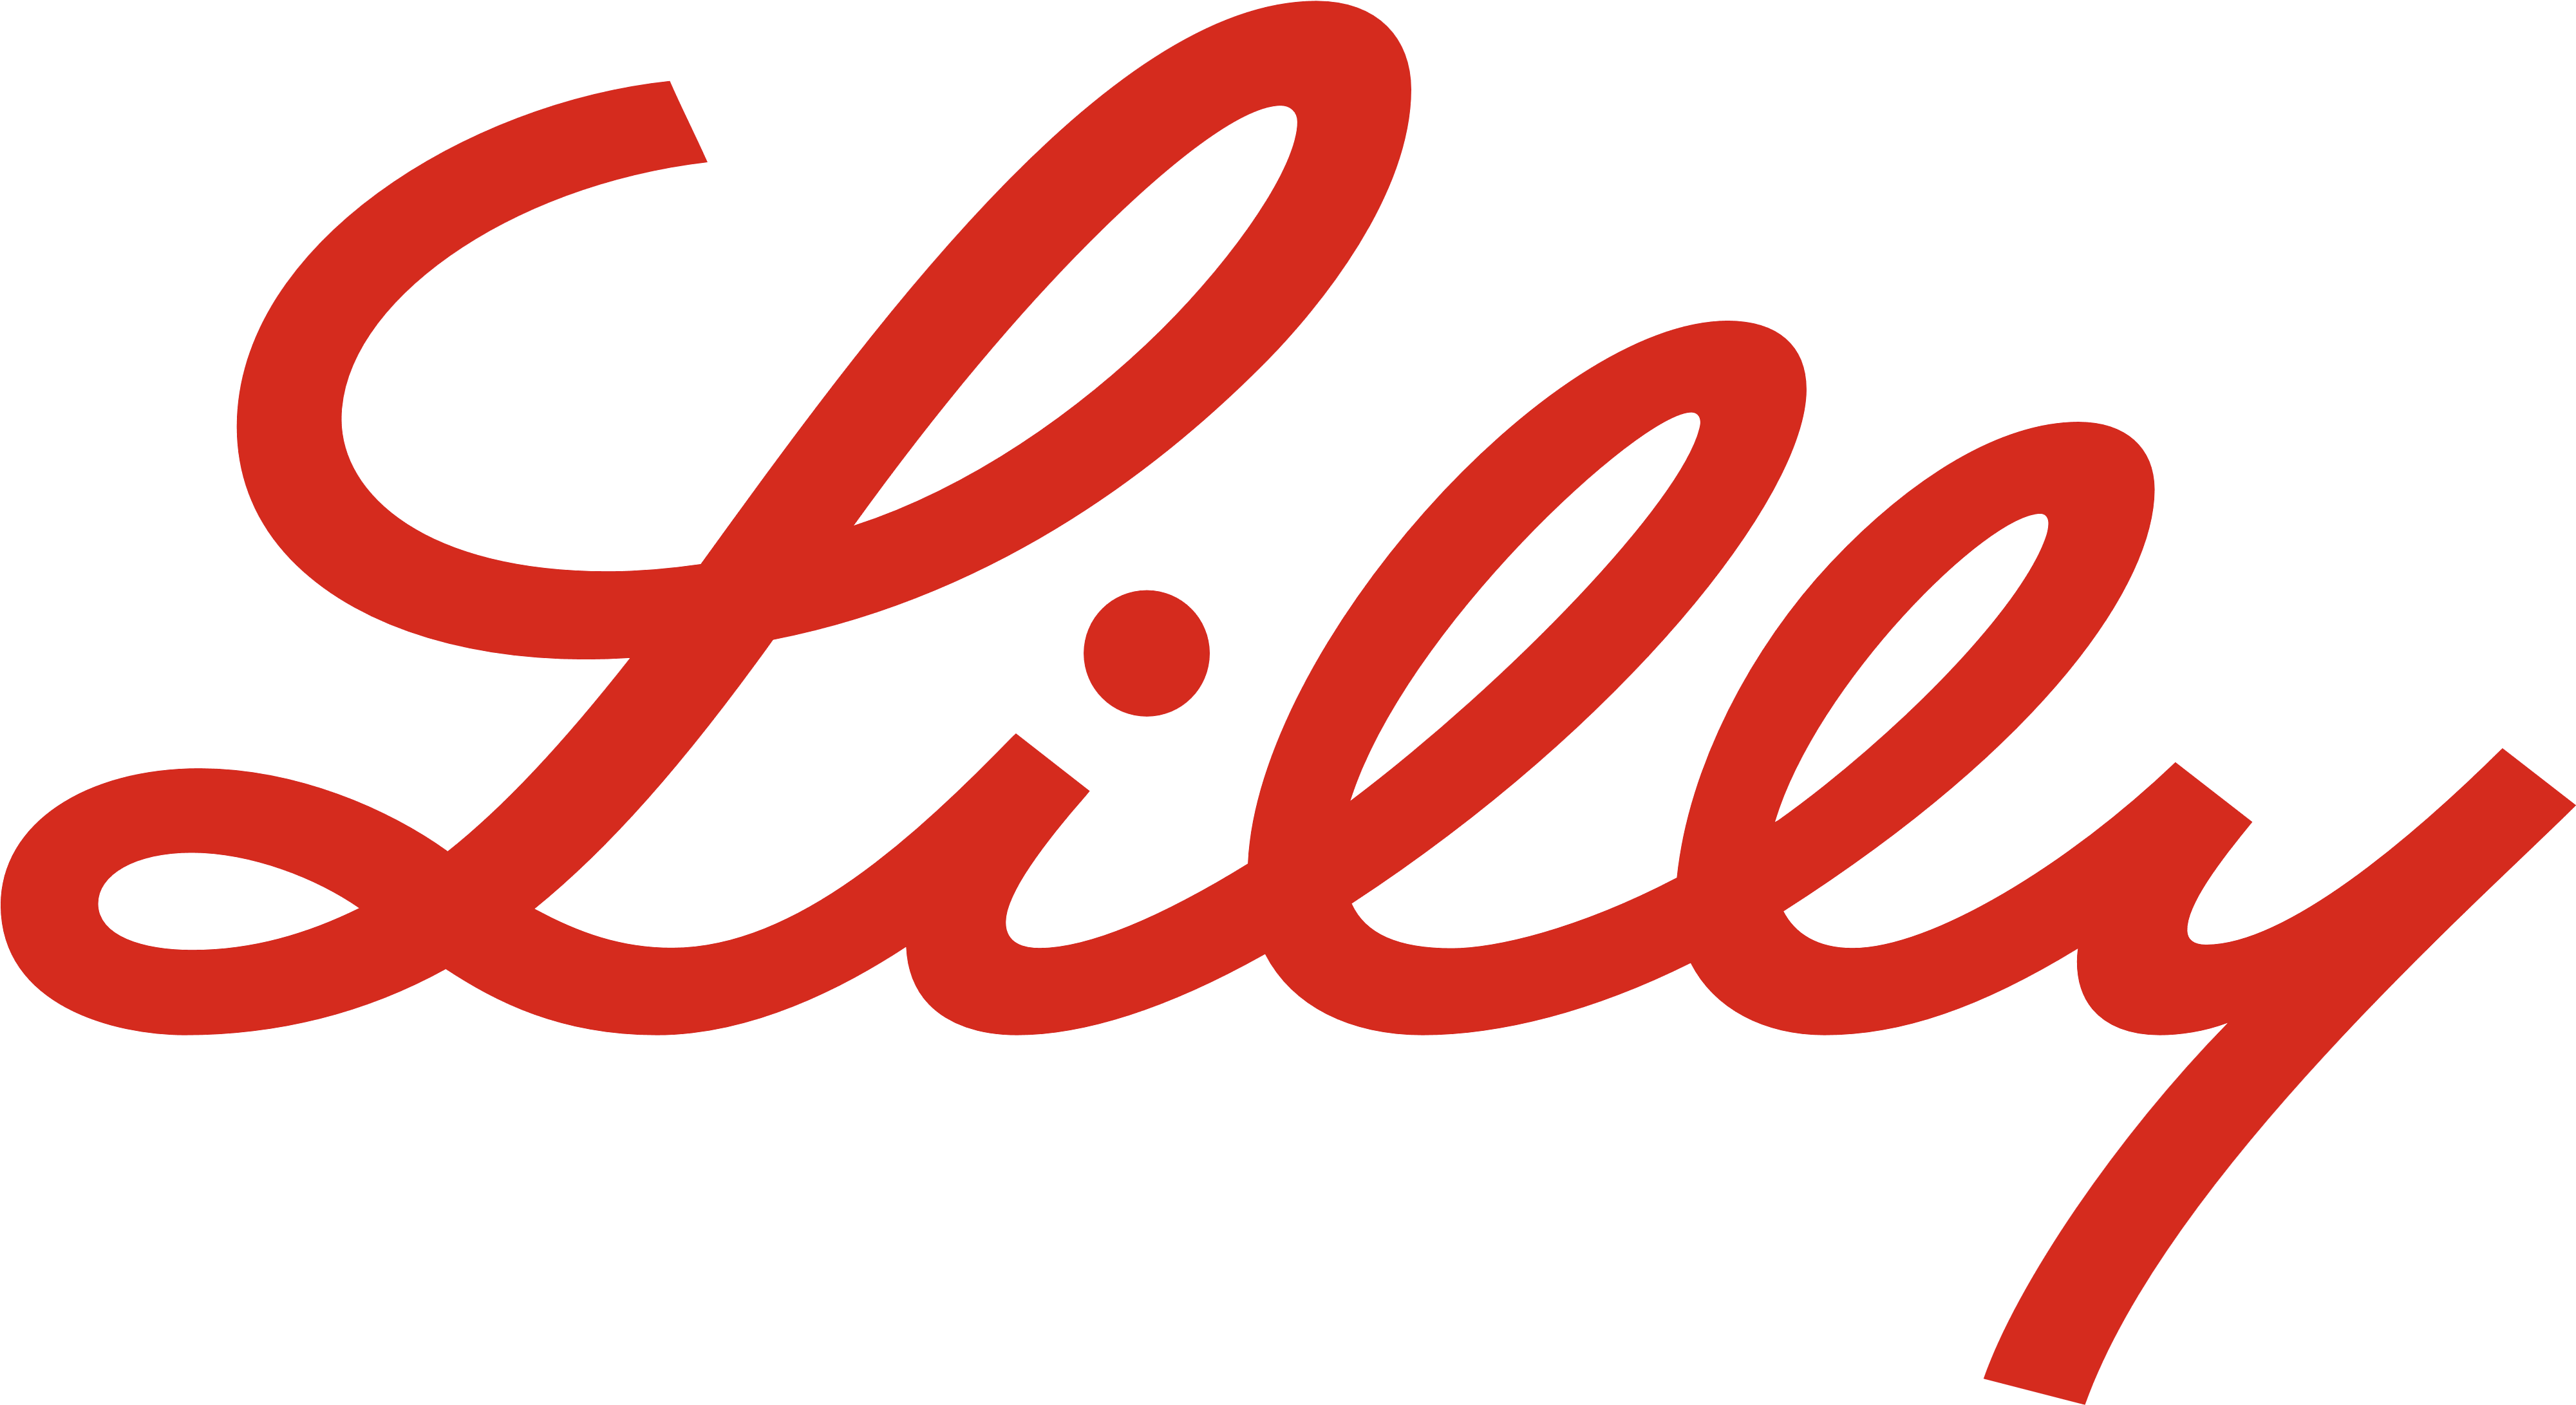 Some Logos Are Clickable And Available In Large Sizes - Eli Lilly And Company Logo (4185x2280)